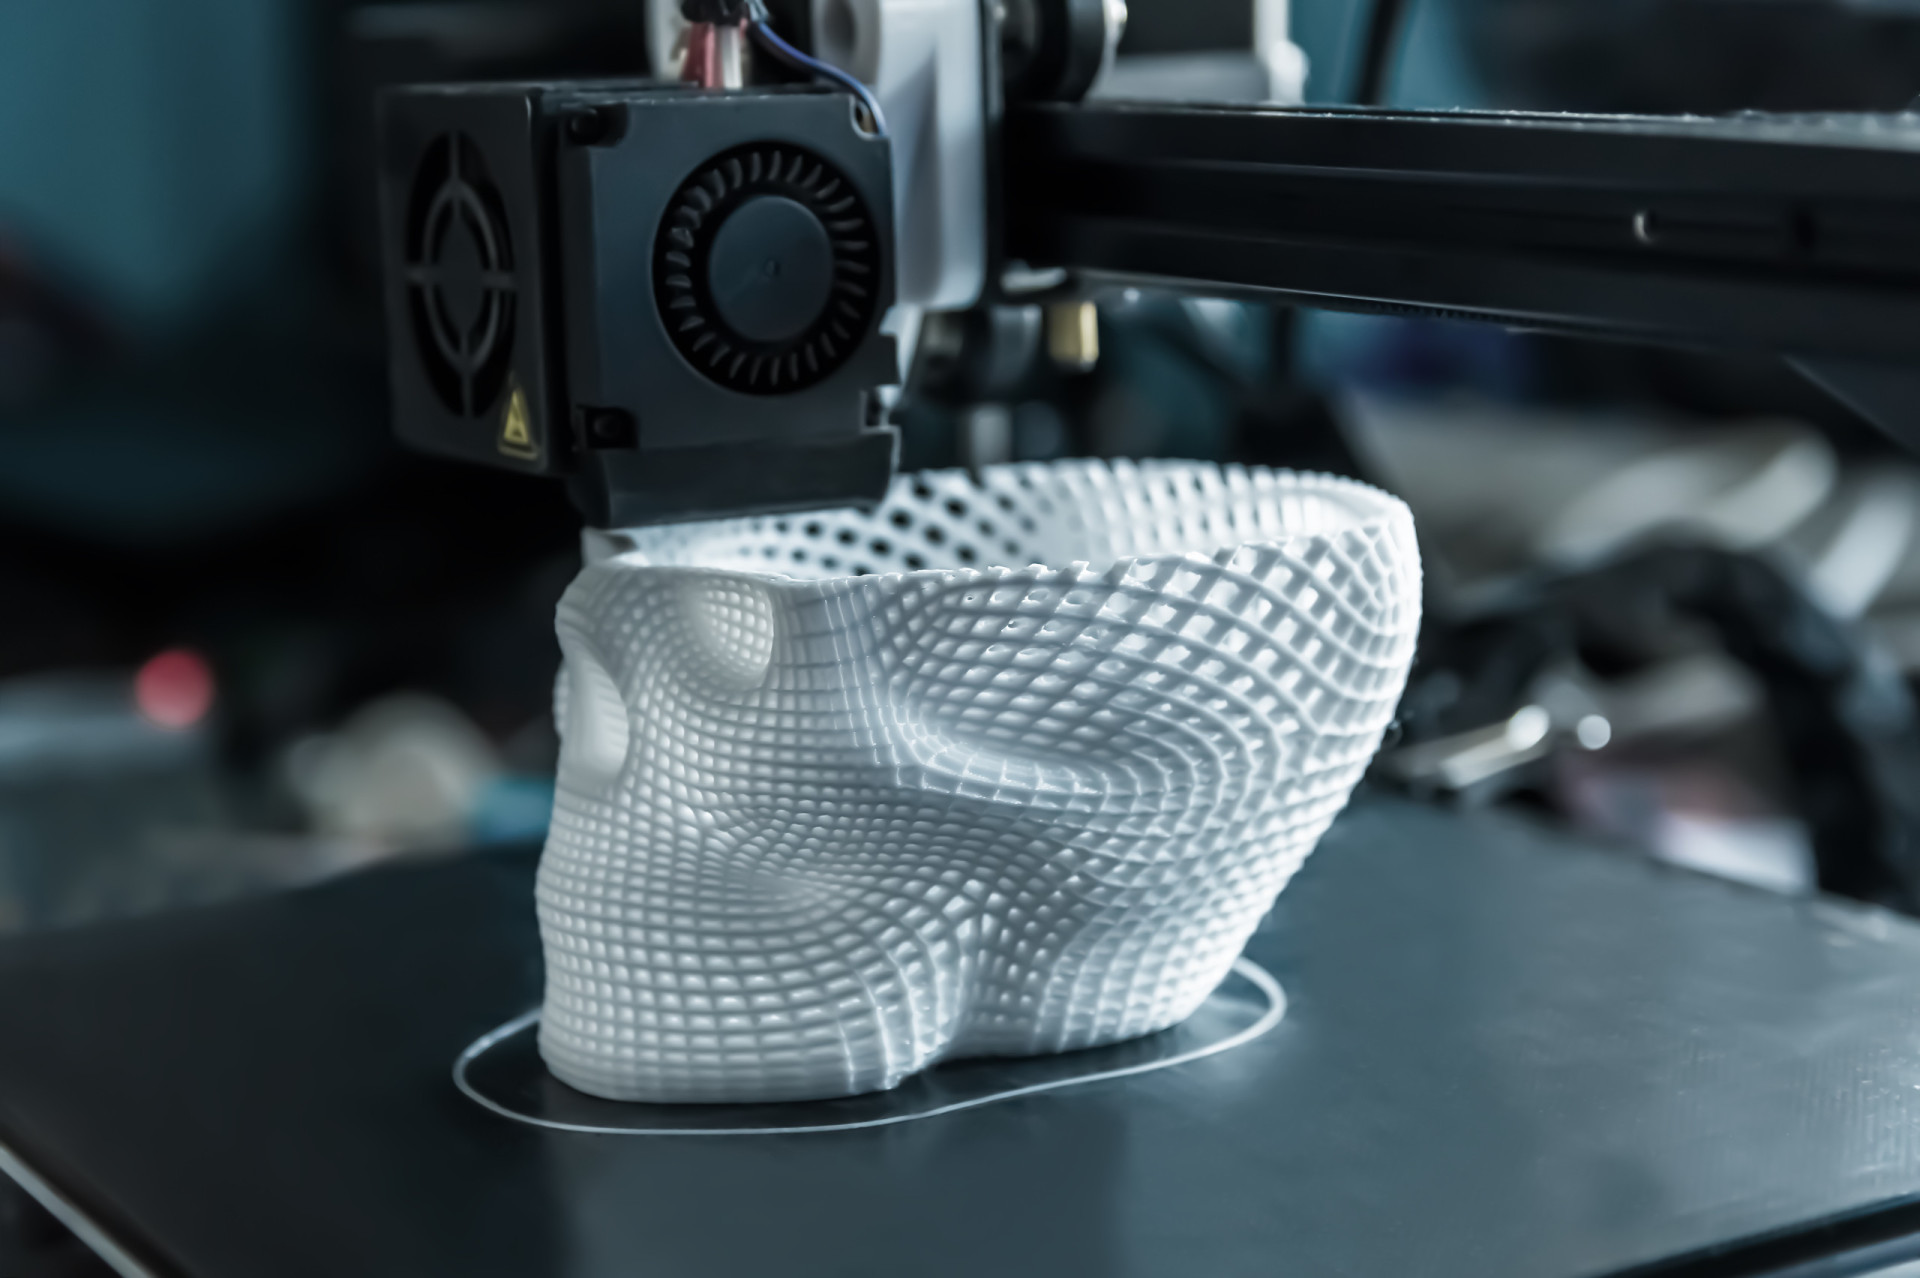 <p>3D printing constructs physical objects layer by layer from digital models. It's a transformative manufacturing process, merging AI, machine learning, and modeling to create intricate designs with diverse applications.</p>